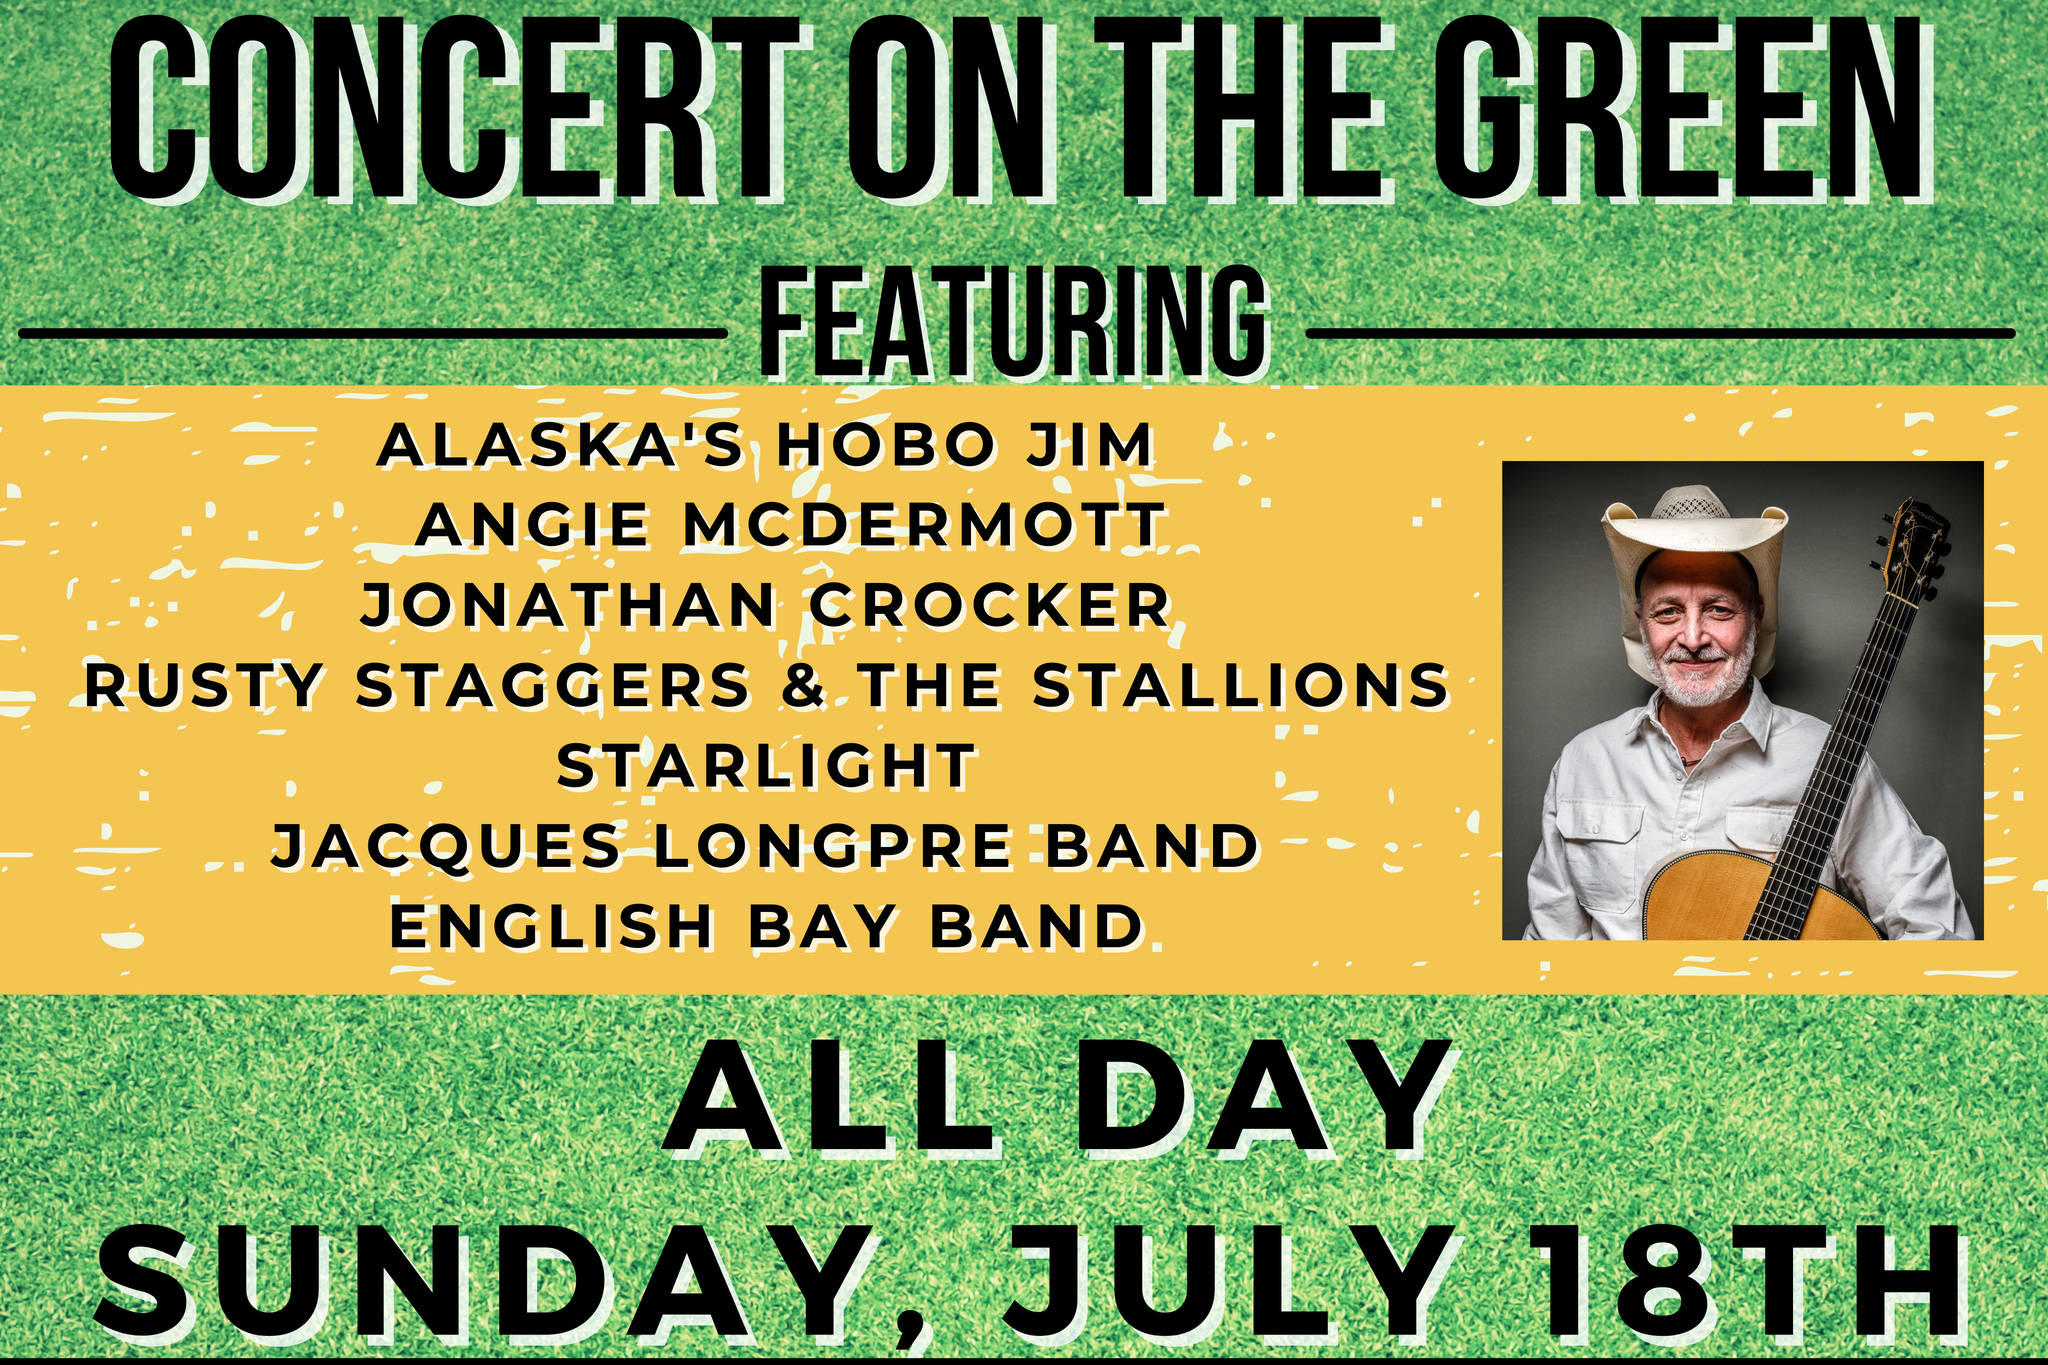 Concert on the Green